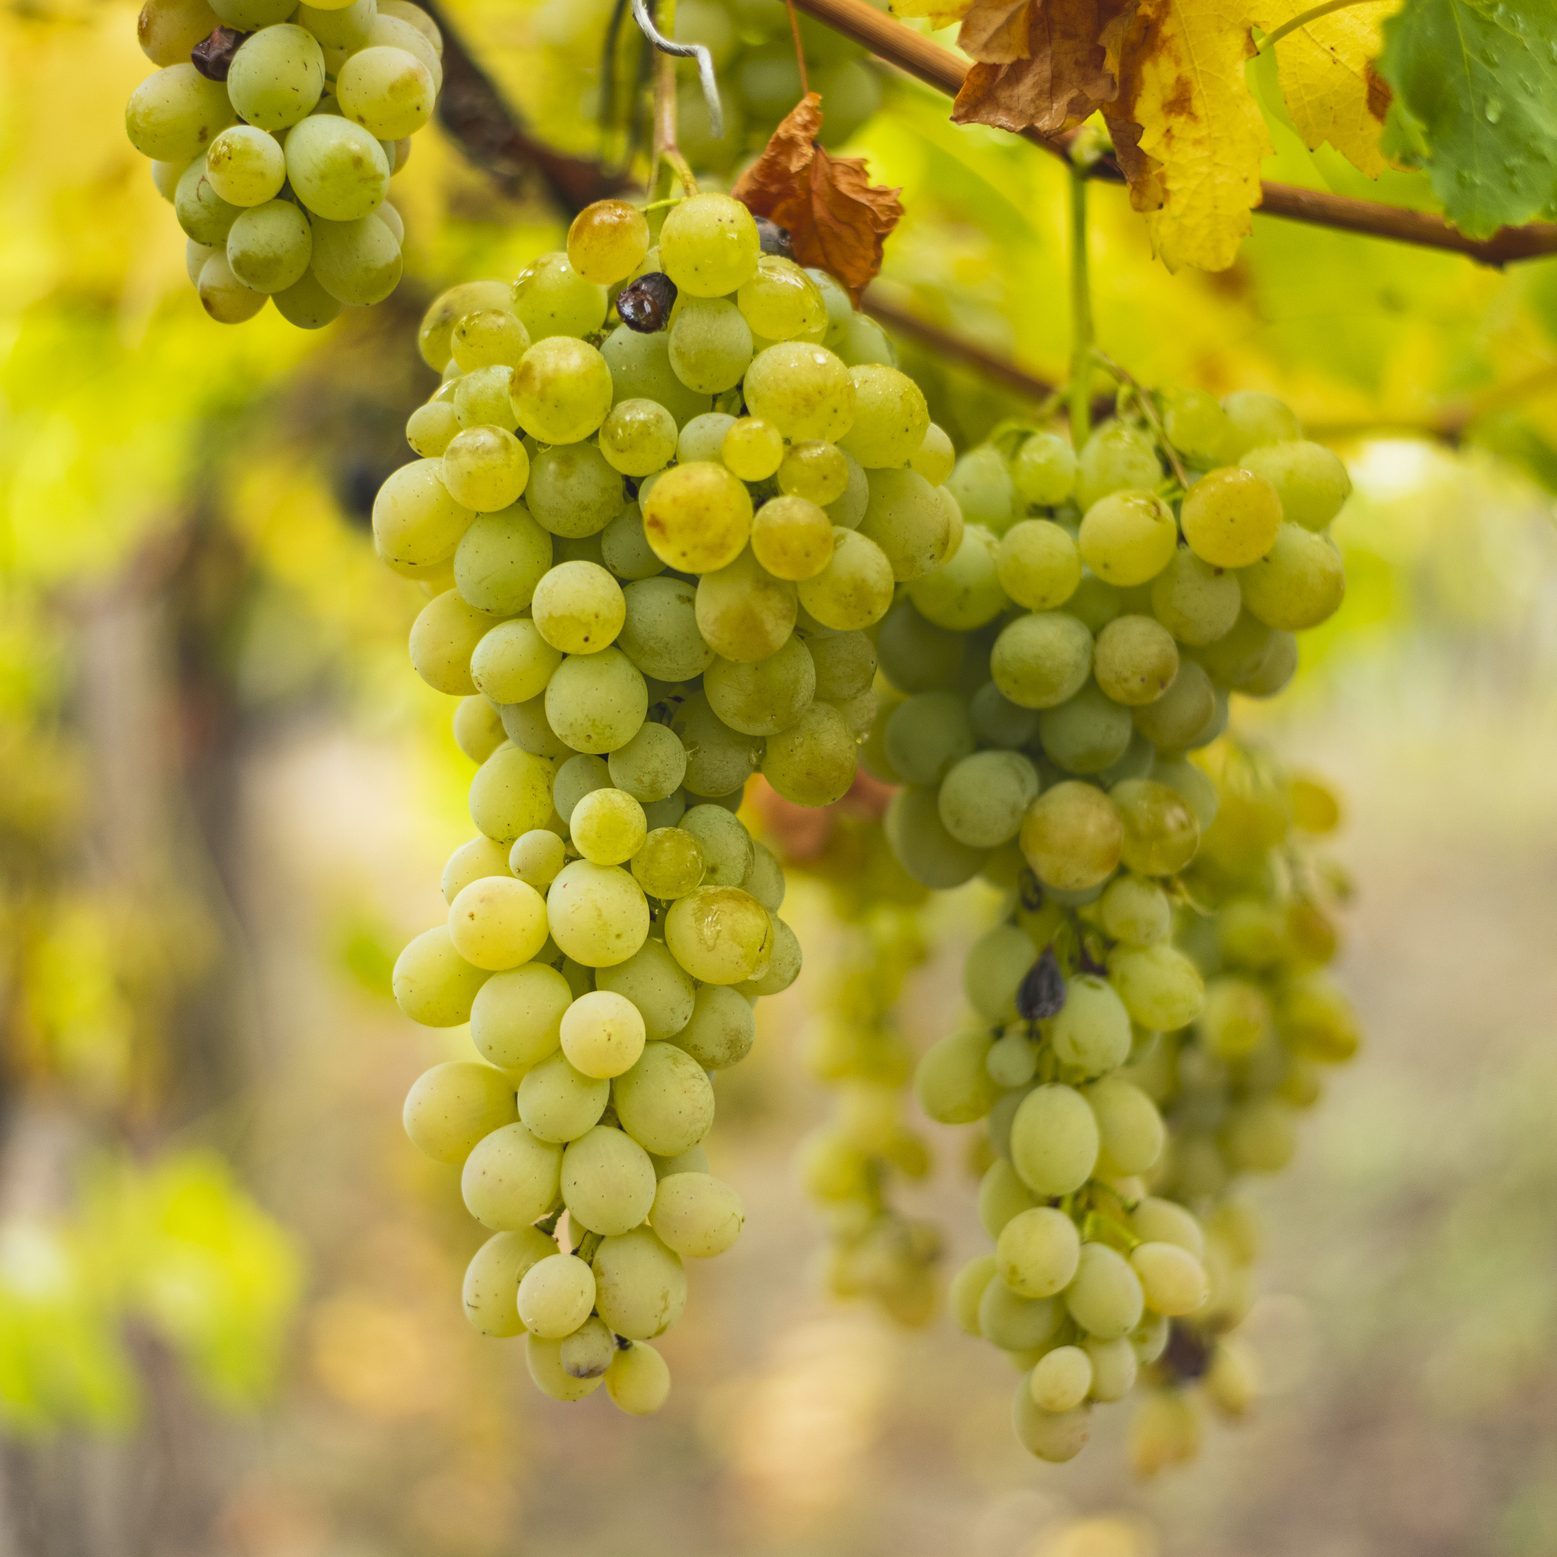 White grapes hanging from the vine in autumn vineyard .